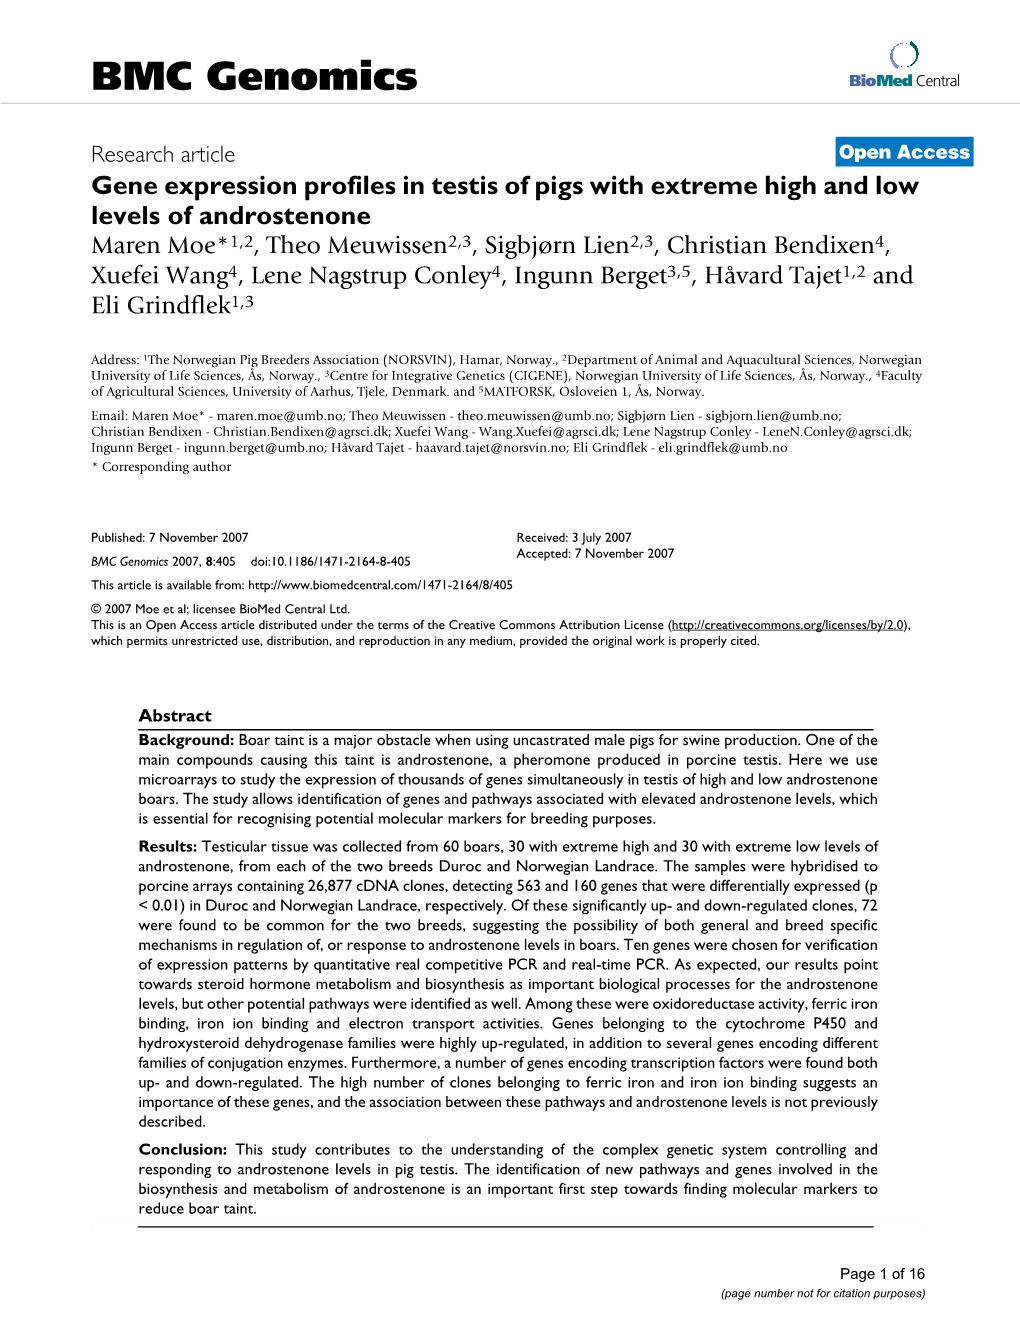 Gene Expression Profiles in Testis of Pigs with Extreme High and Low